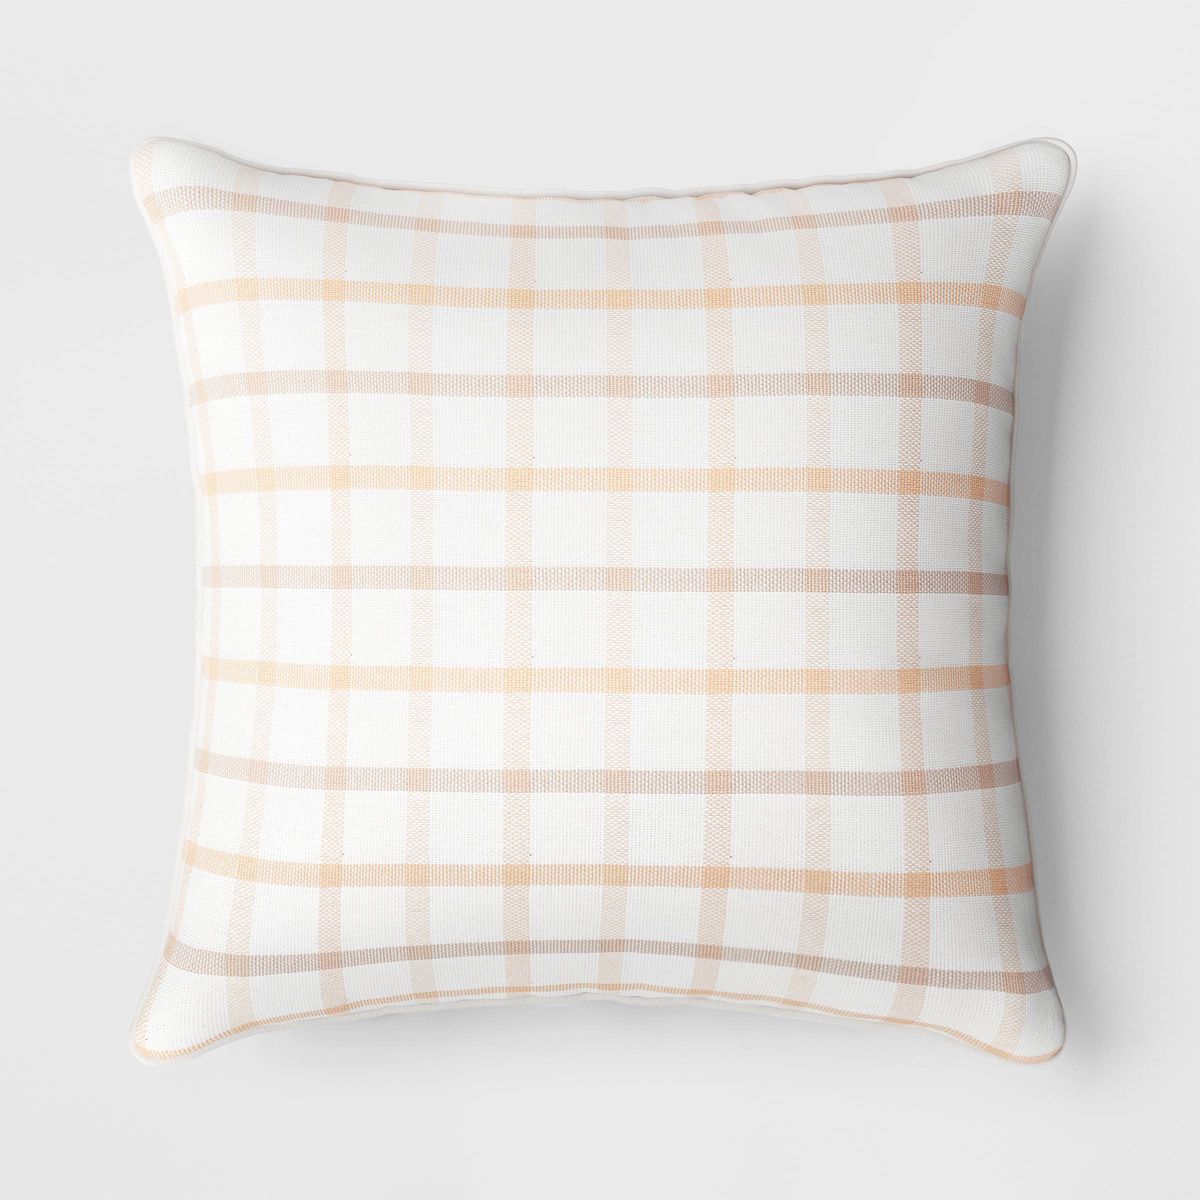 Woven Grid Square Throw Pillow - Threshold™ | Target